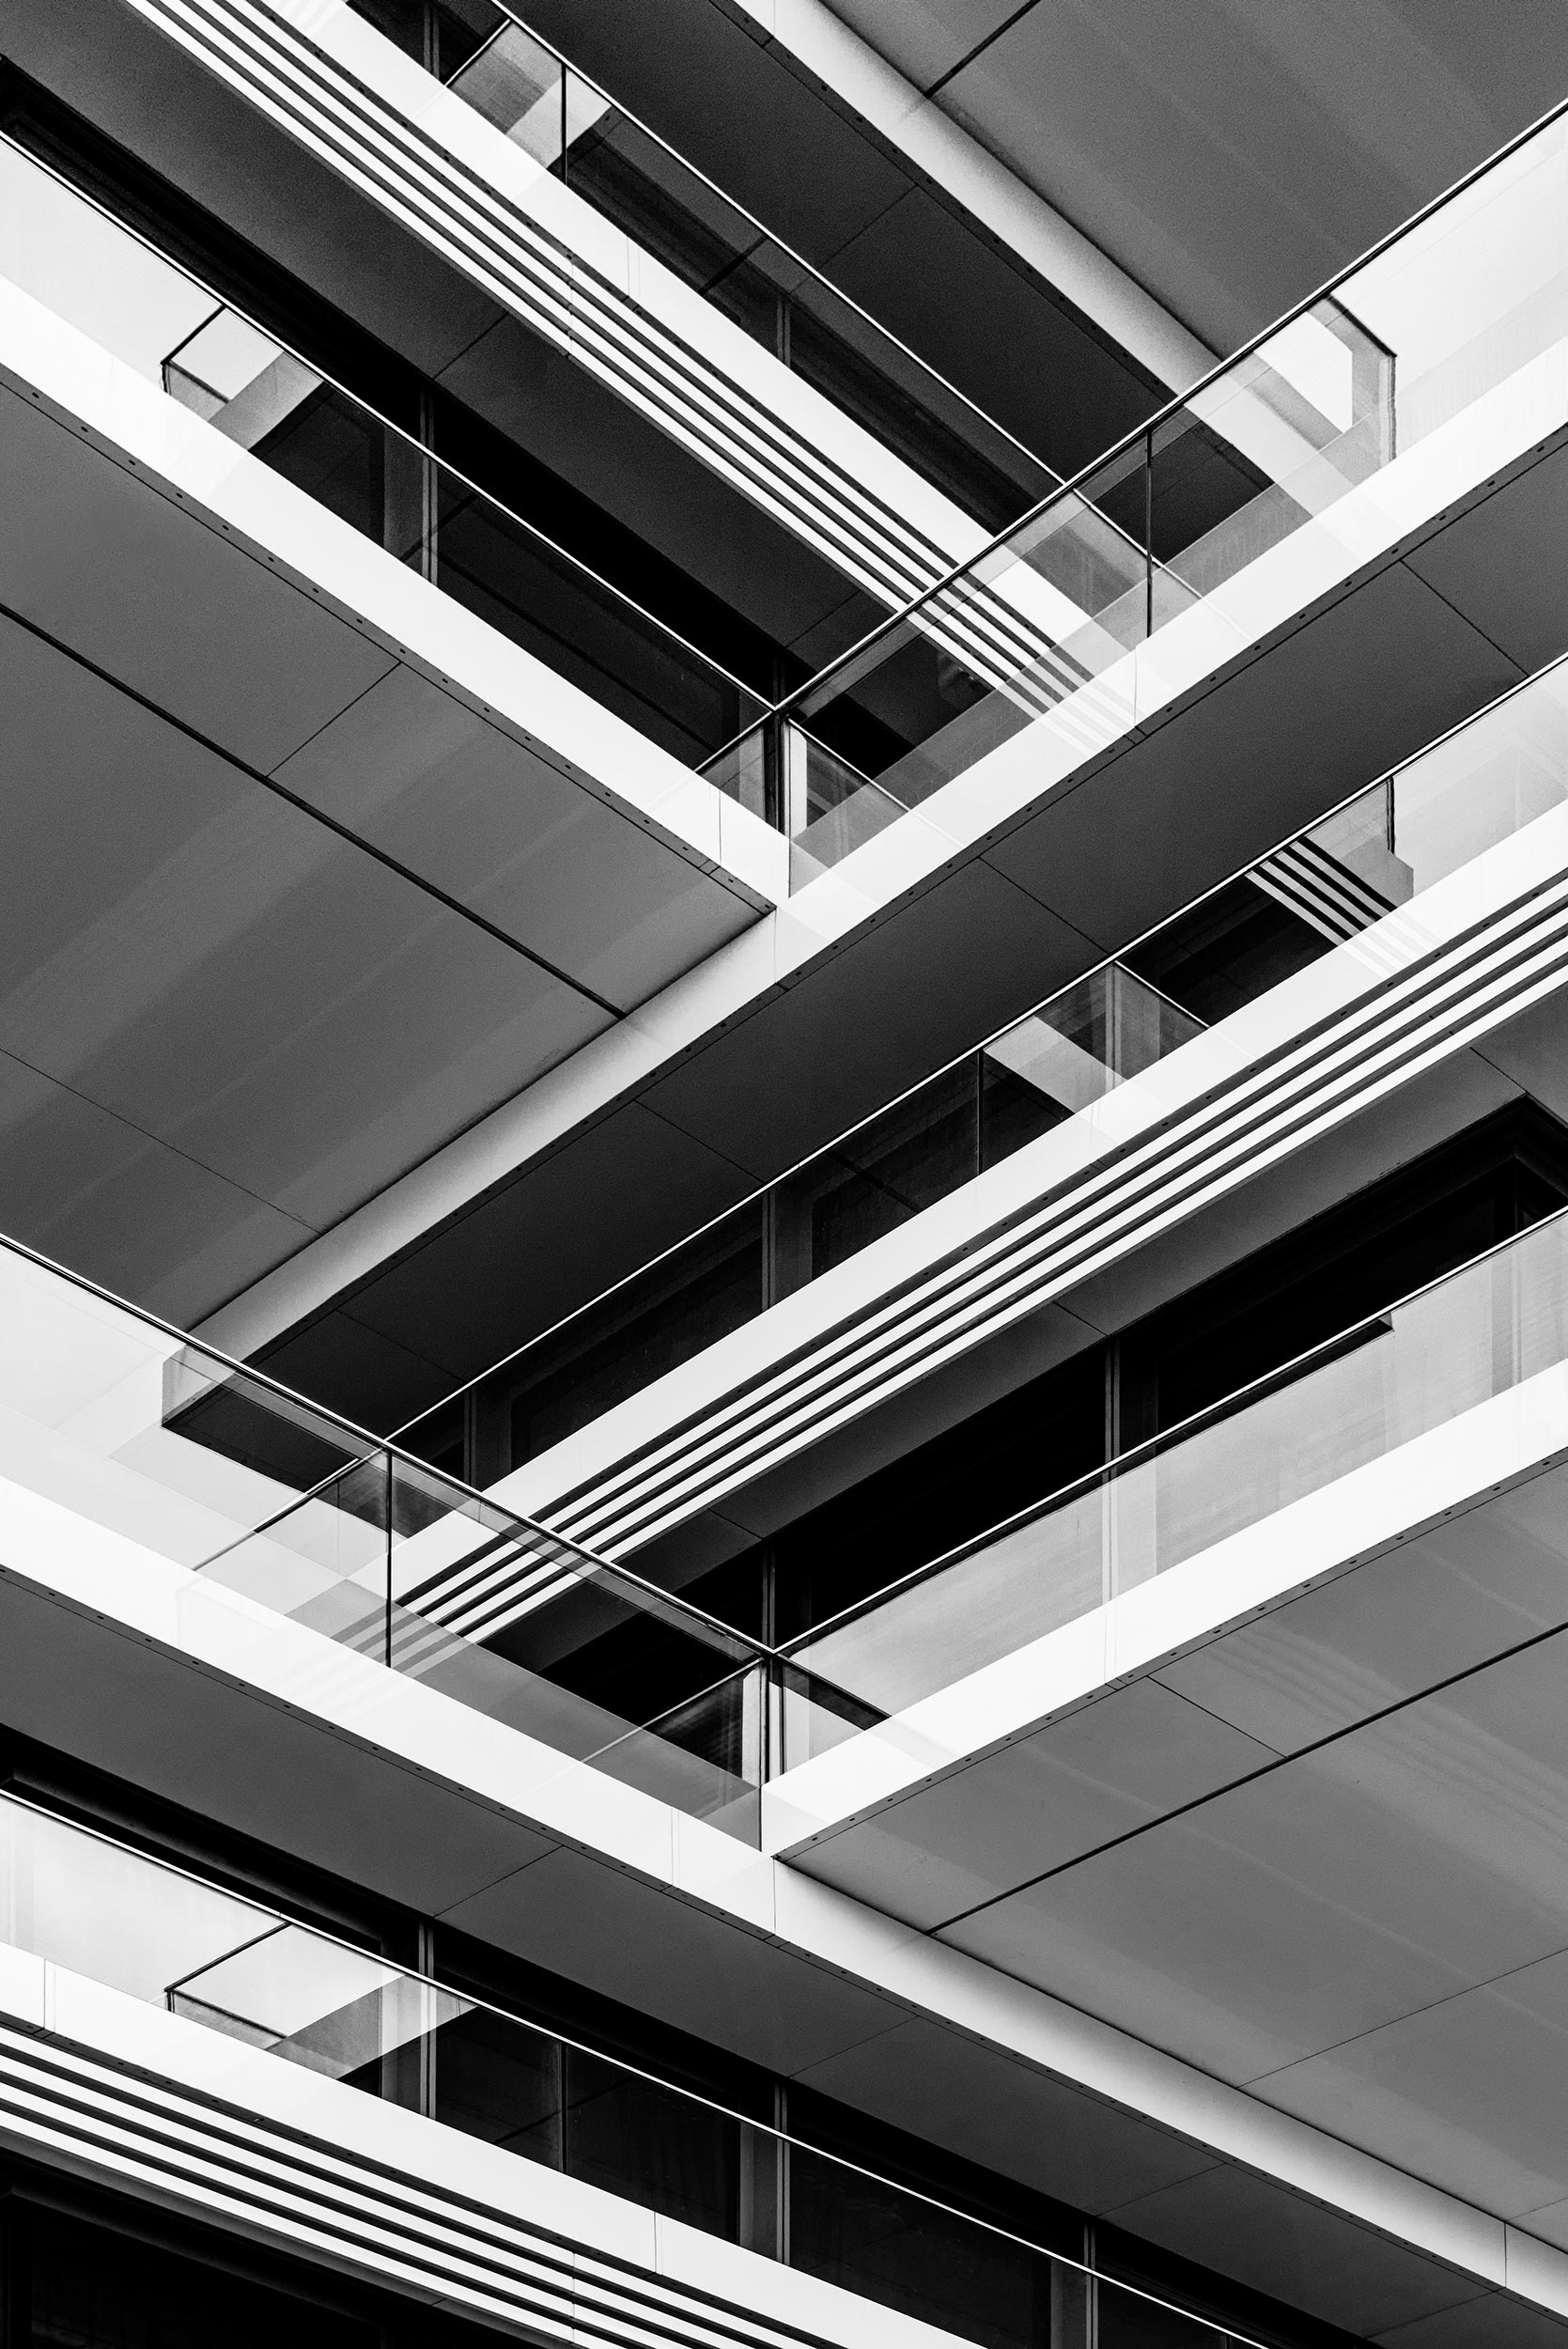 Living Levels, Berlin, Architecture Photography, Black & White